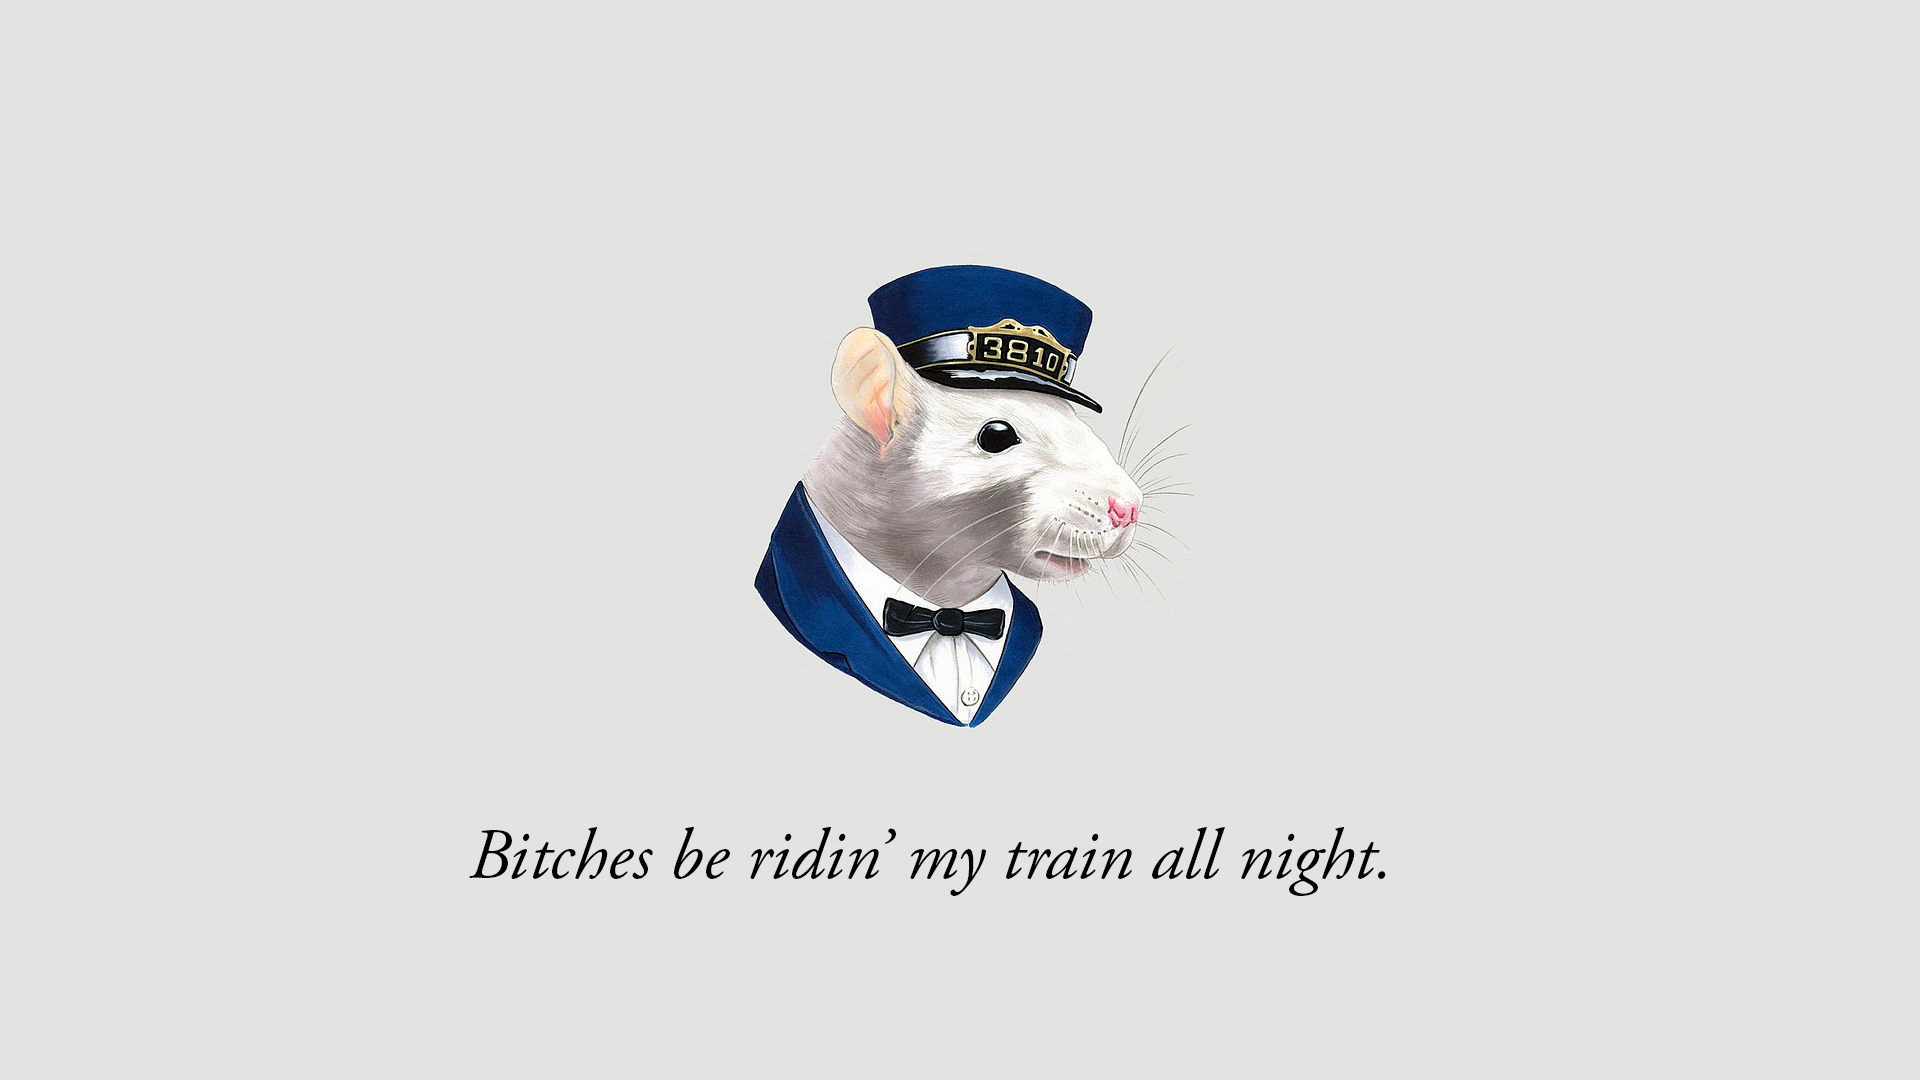 mouse, Suit, Hat, Wtf, Humor, Funny, Swearing, Statement, Quotes Wallpaper